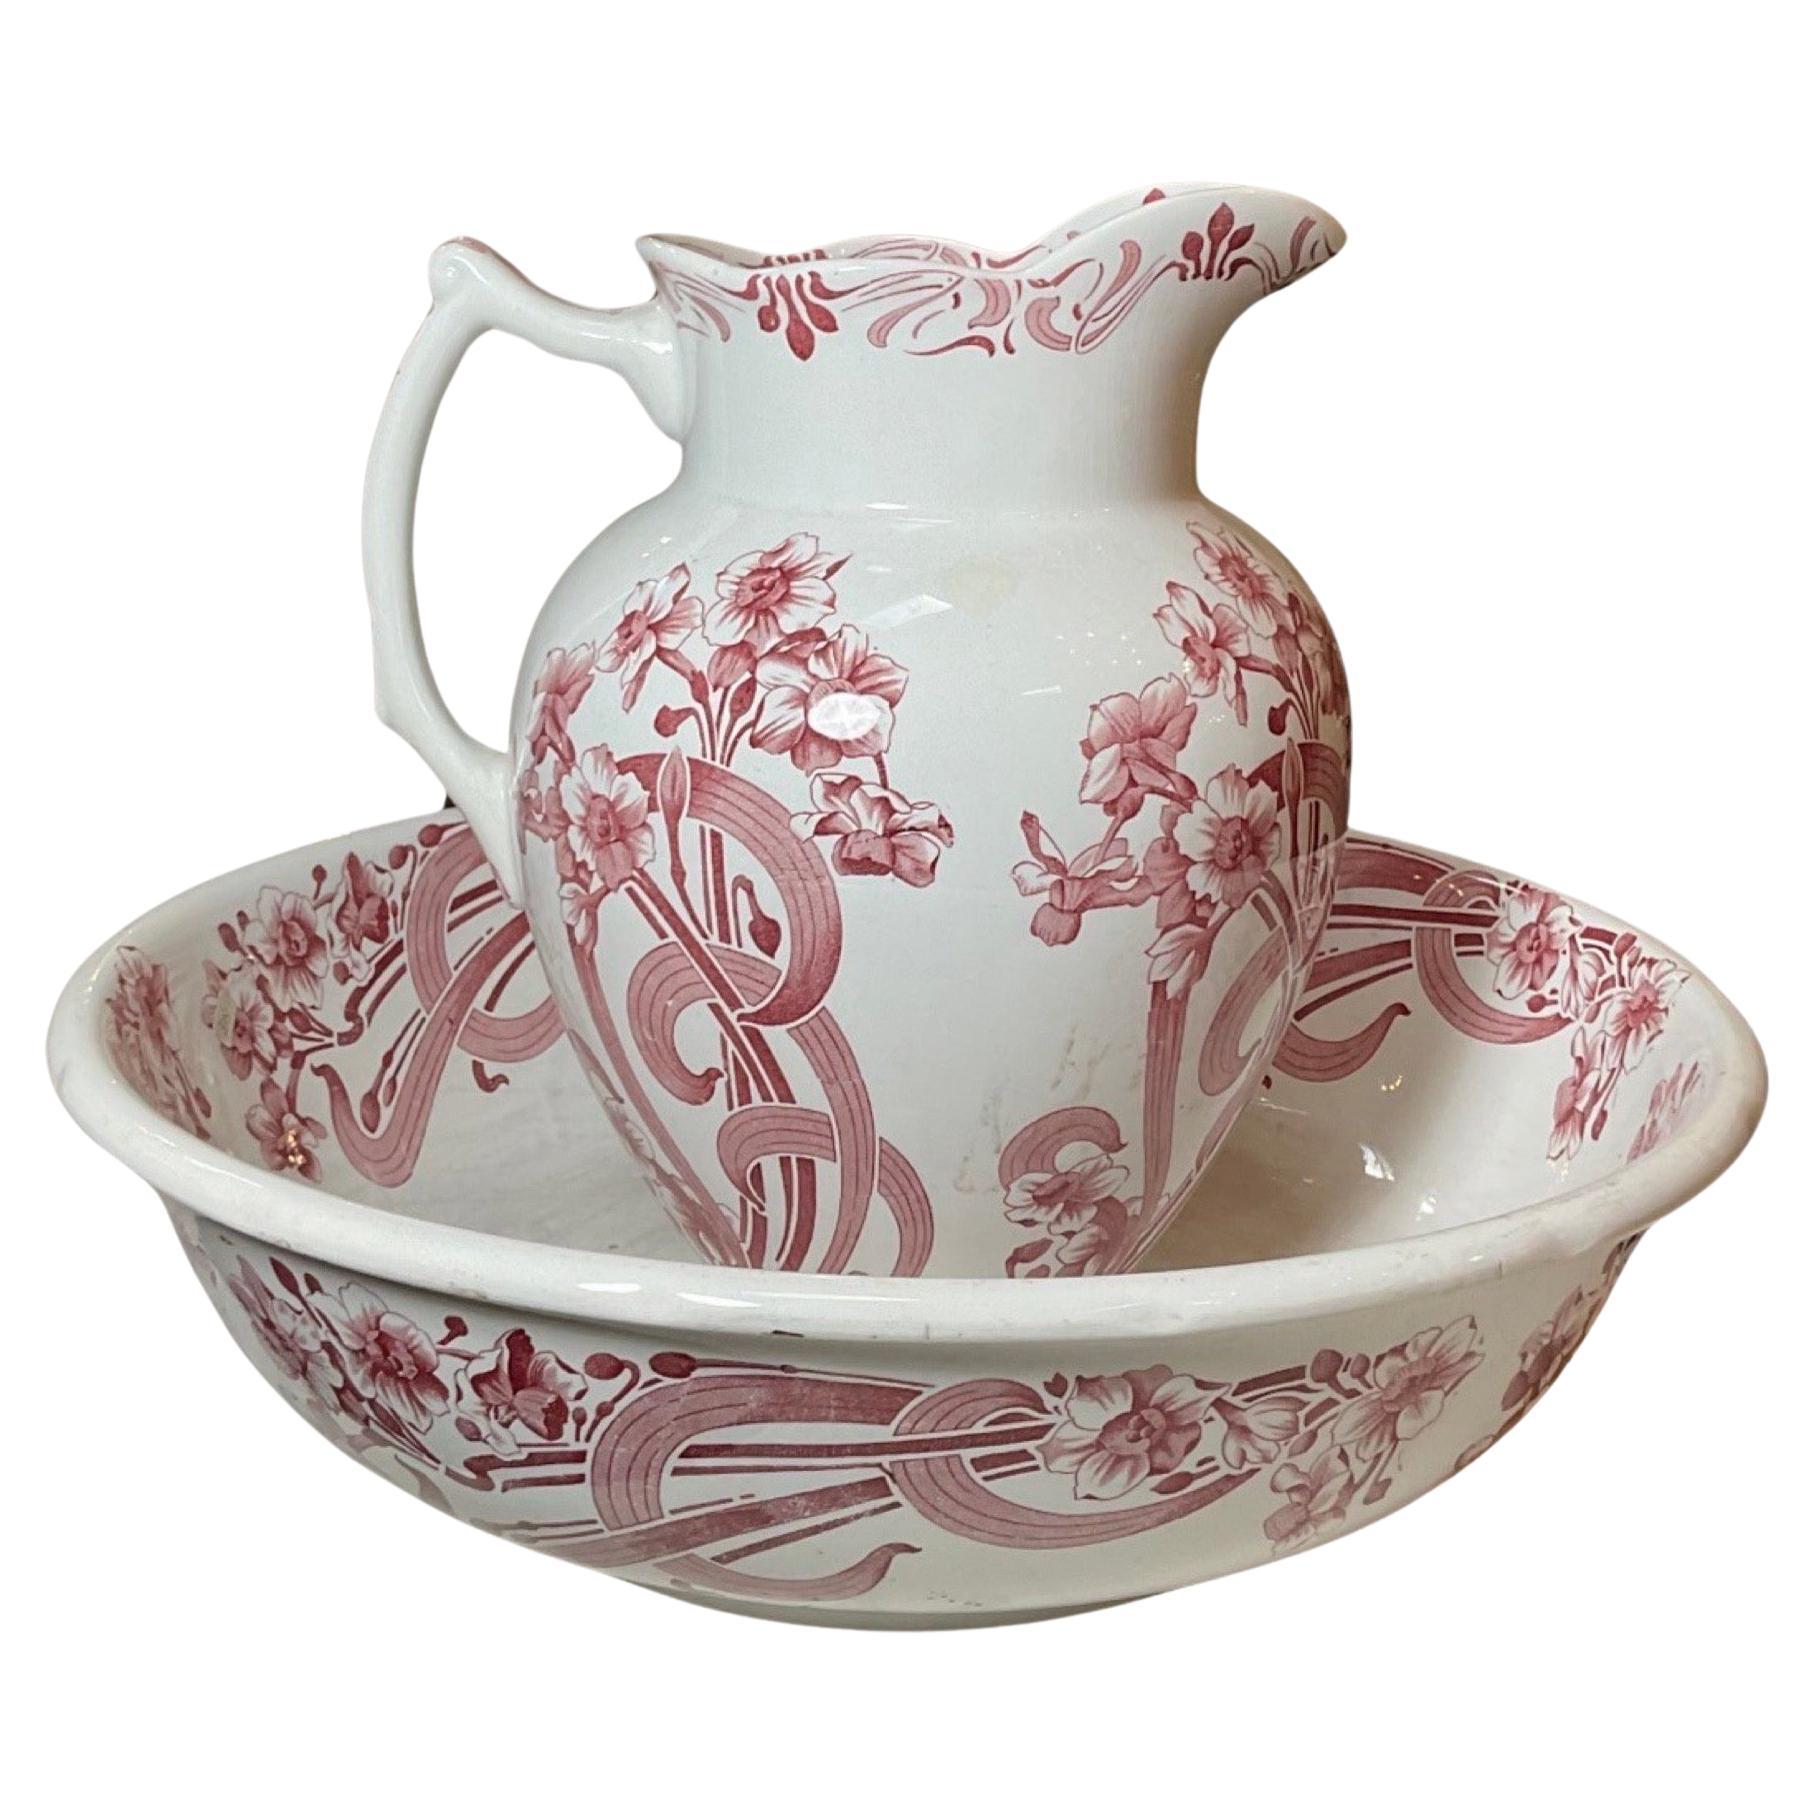 English Antique Porcelain Bowl and Pitcher For Sale